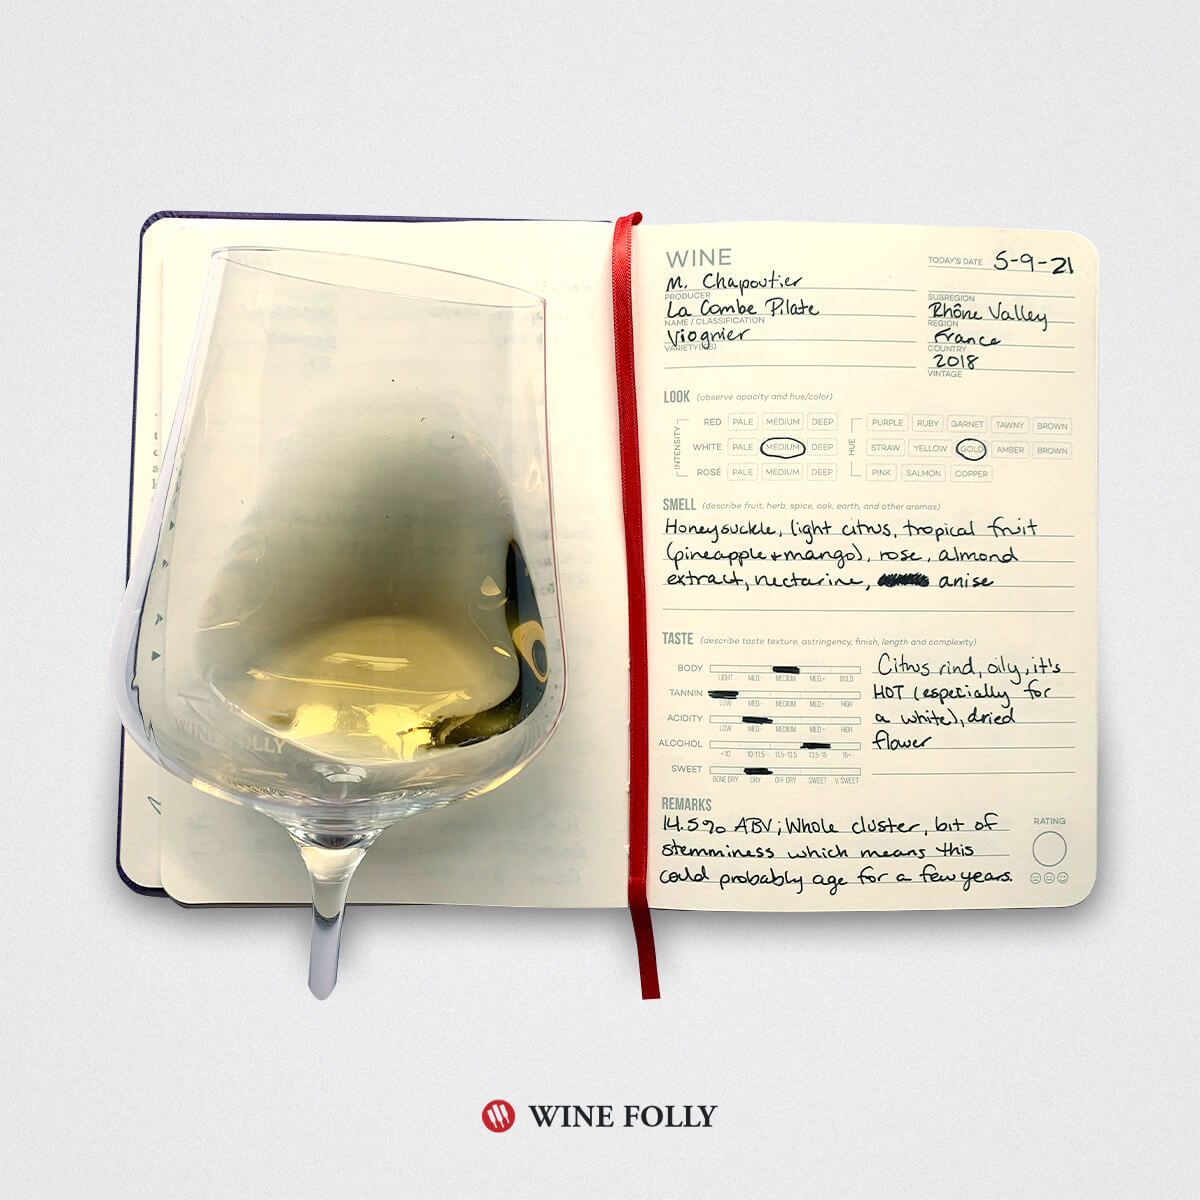 open wine journal with an entry about french viognier